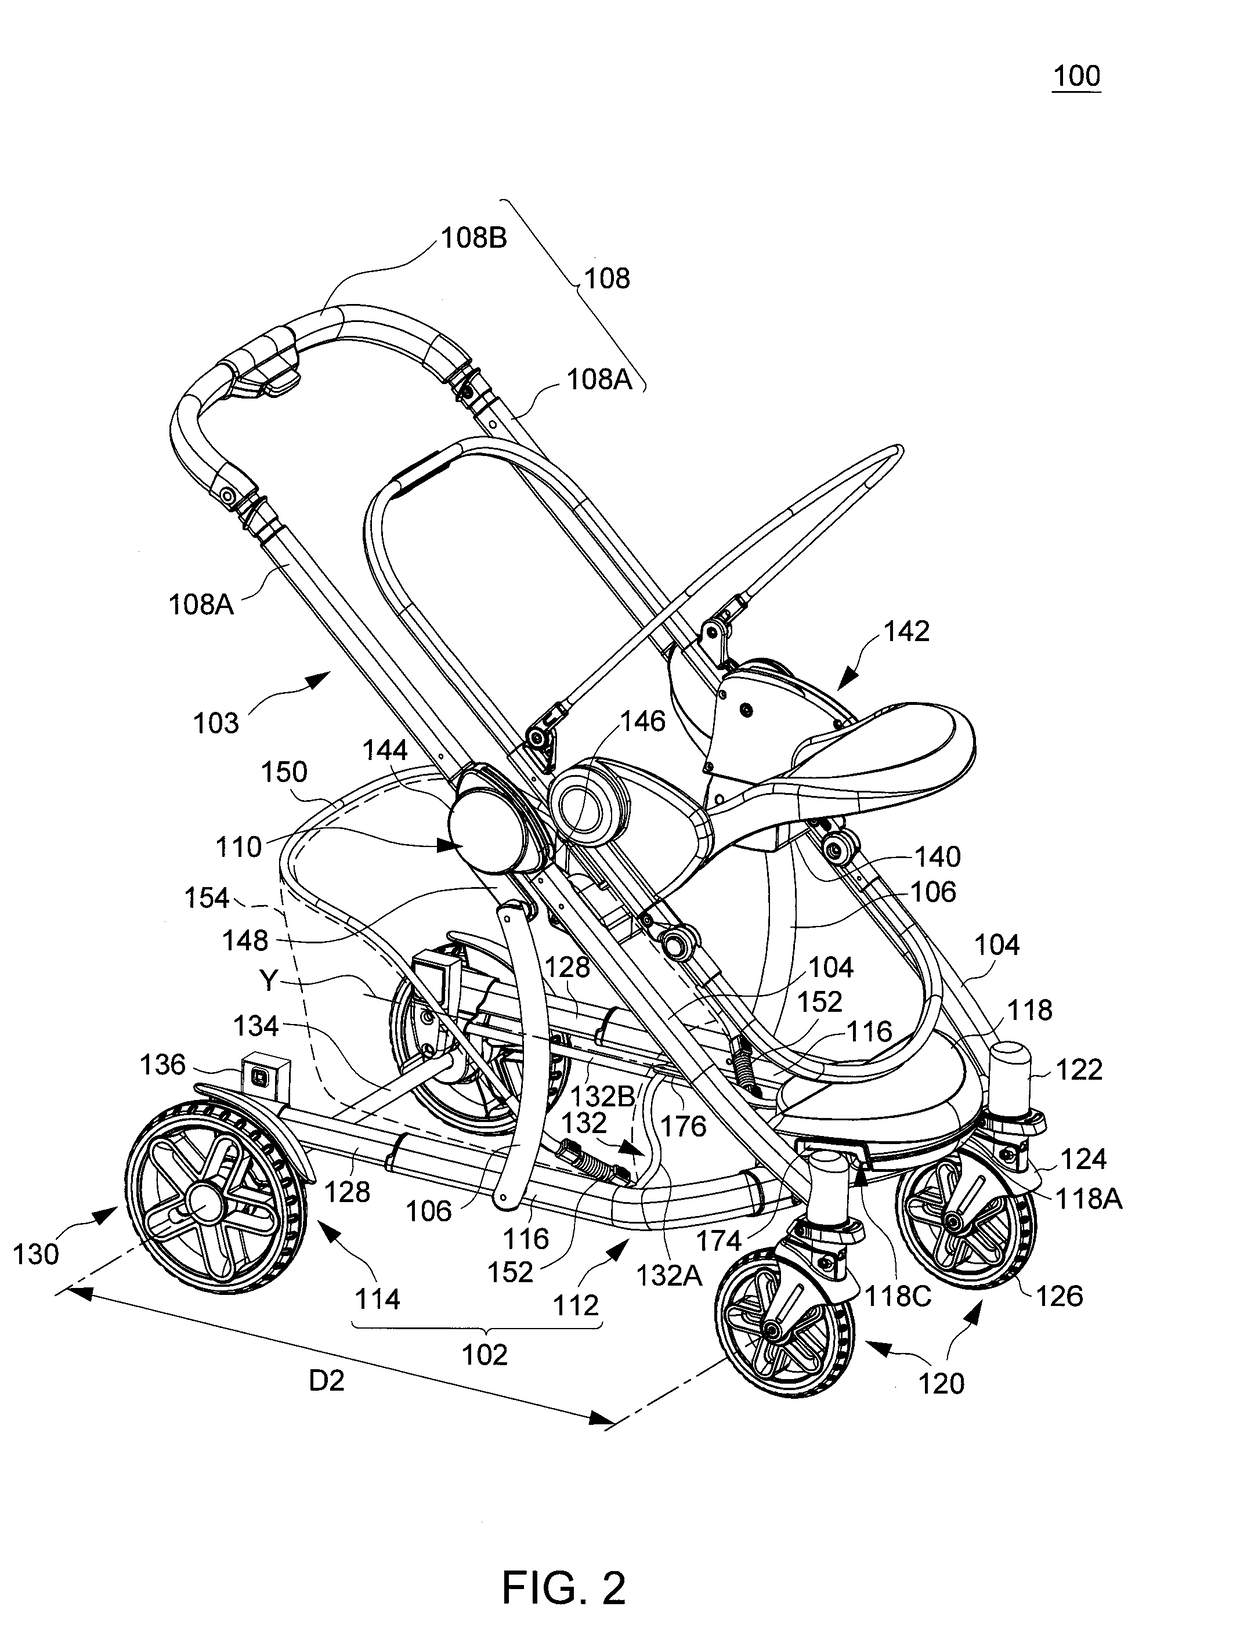 Child Stroller Apparatus Having An Expandable Frame